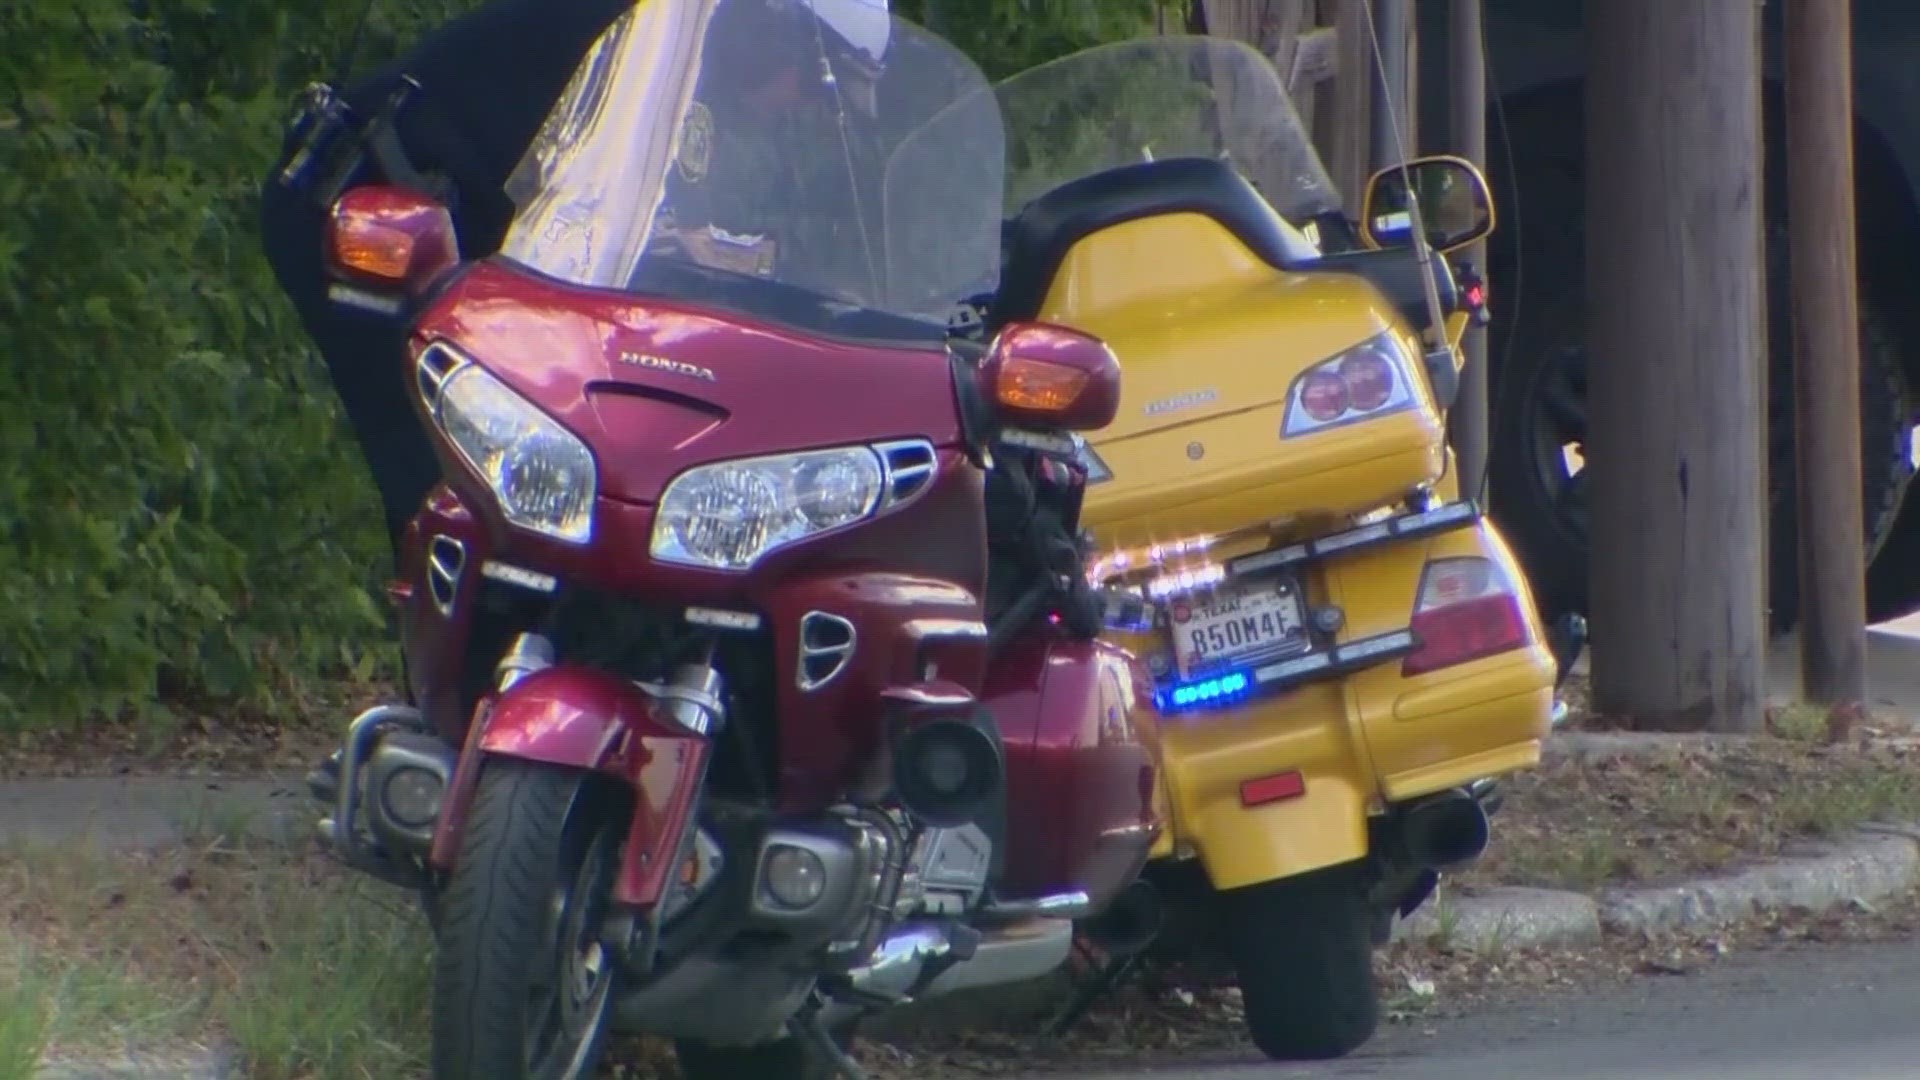 Within the past 5 months, KENS 5 has reported on three different incidents where motorcycle officers were hurt while working a funeral procession.